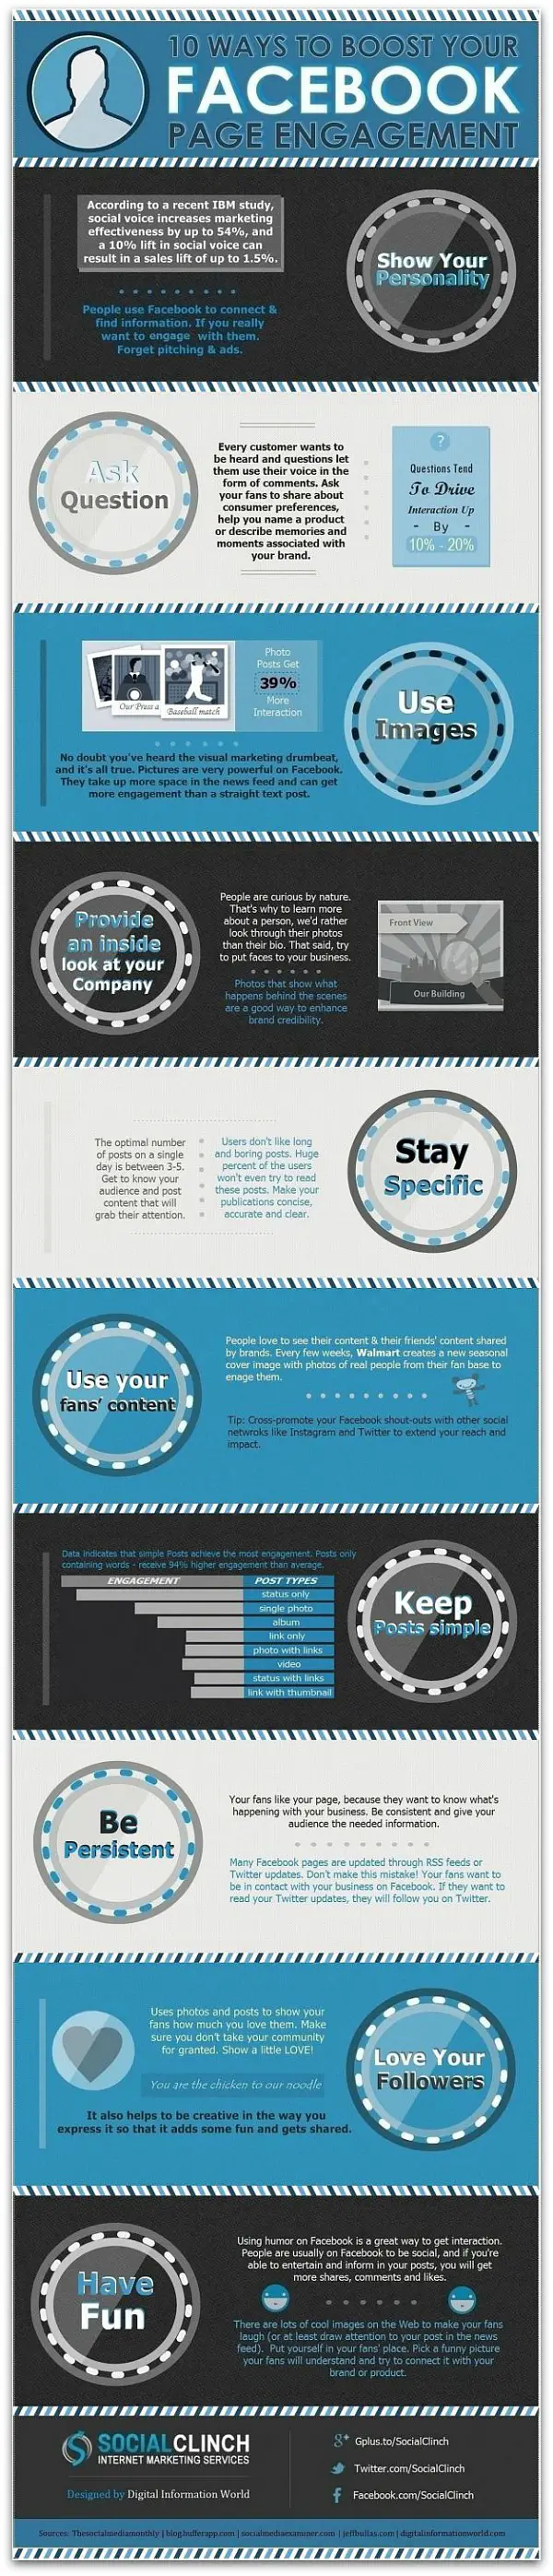 Boost_Facebook_Engagement_Infographic-2